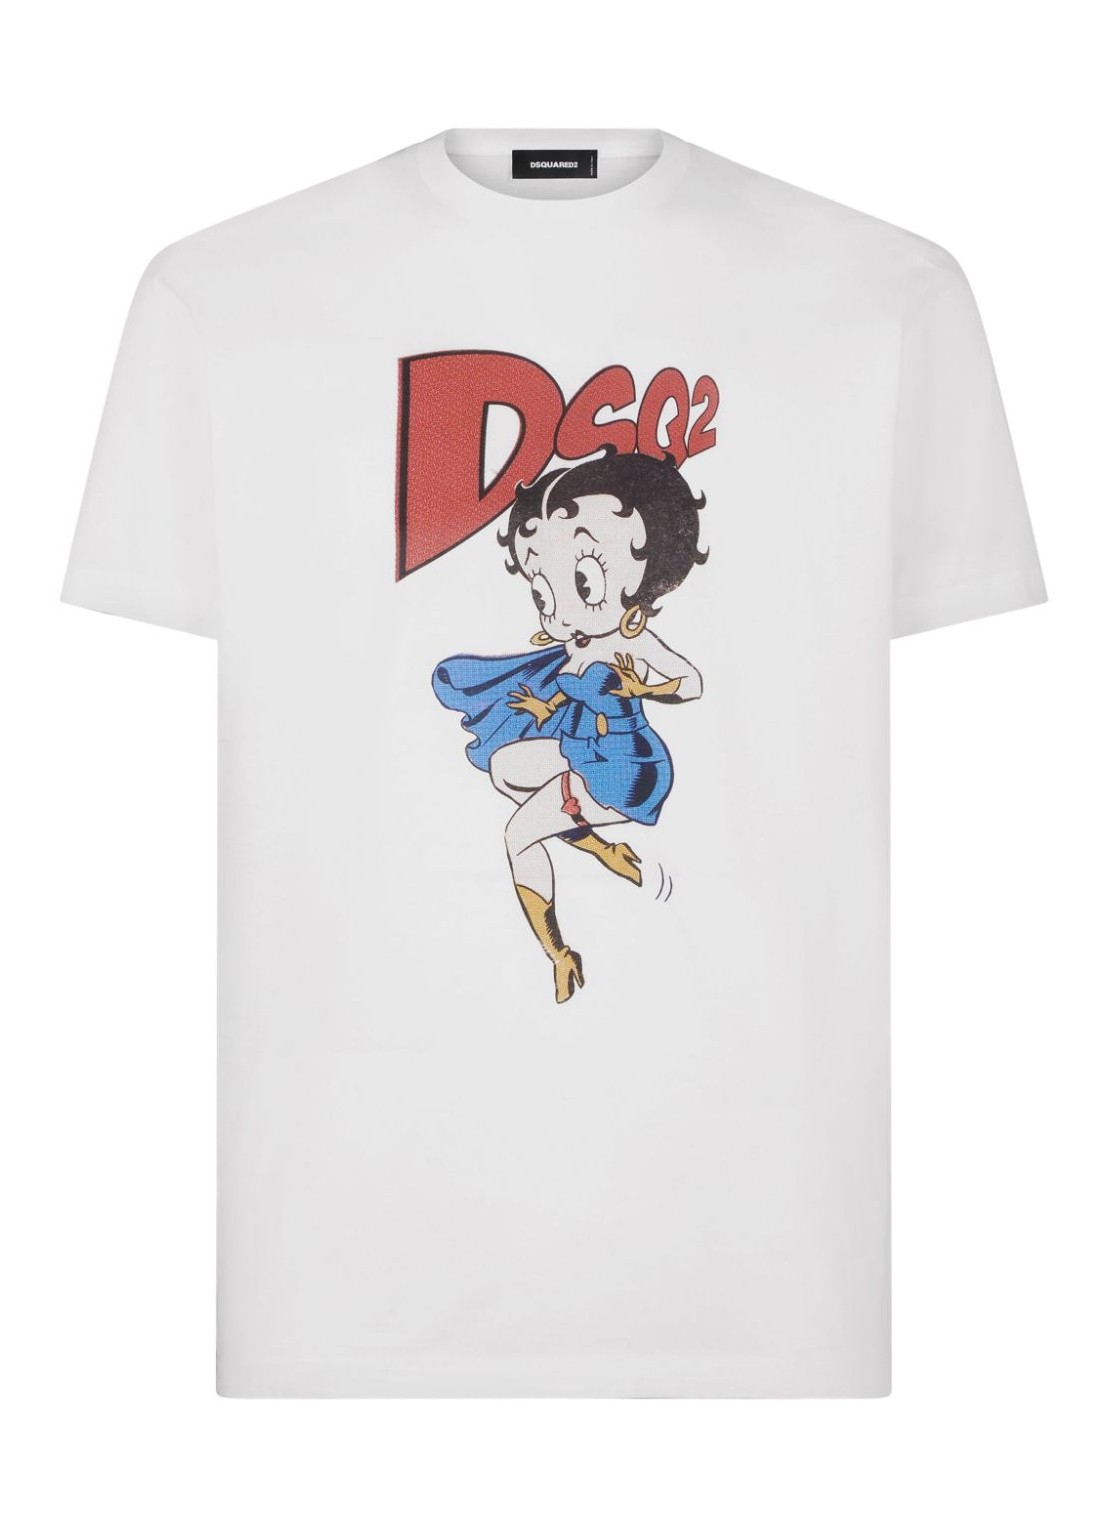 Camiseta dsquared t-shirt man betty boop cool fit tee s74gd1269s23009 100 talla blanco
 